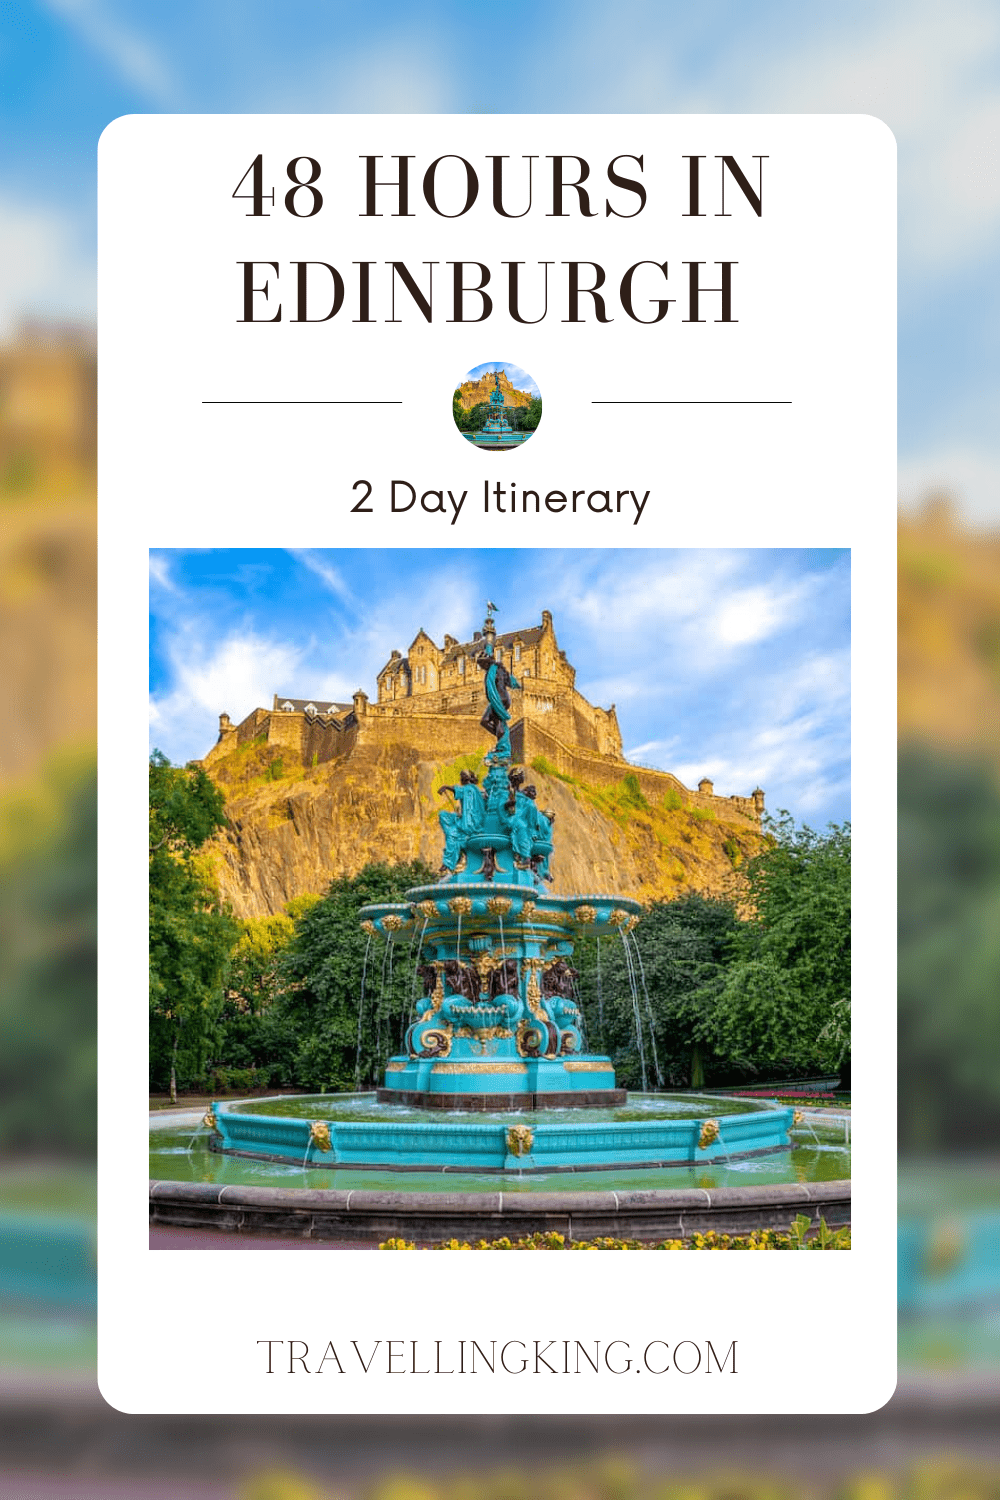 48 Hours in Edinburgh - A 2 Day Itinerary